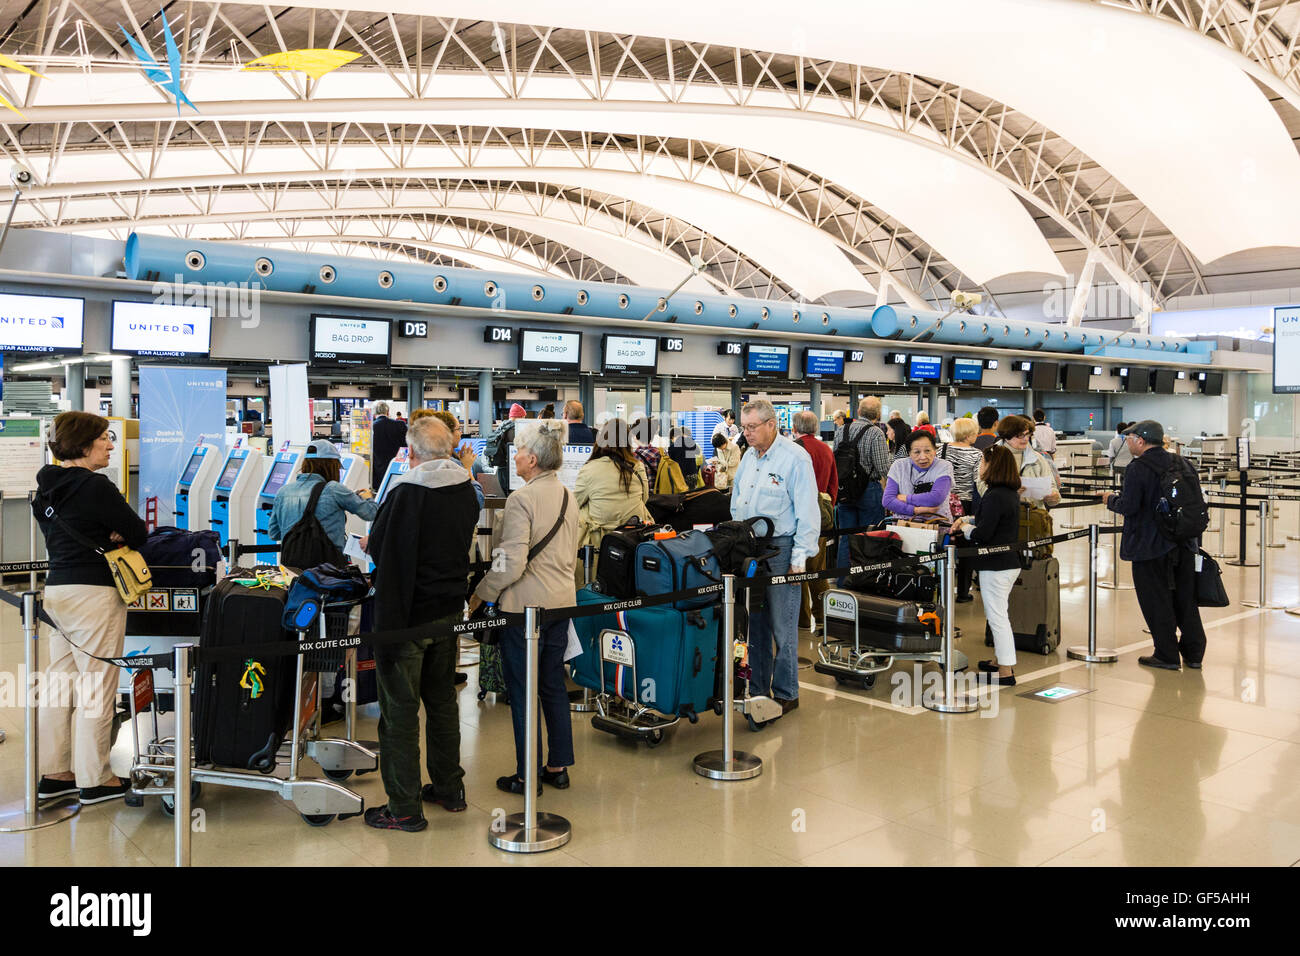 Japan, Kansai airport, KIX. Interior of terminal one. International check-in. American tourists queuing at check in desks for United airlines flight. Stock Photo